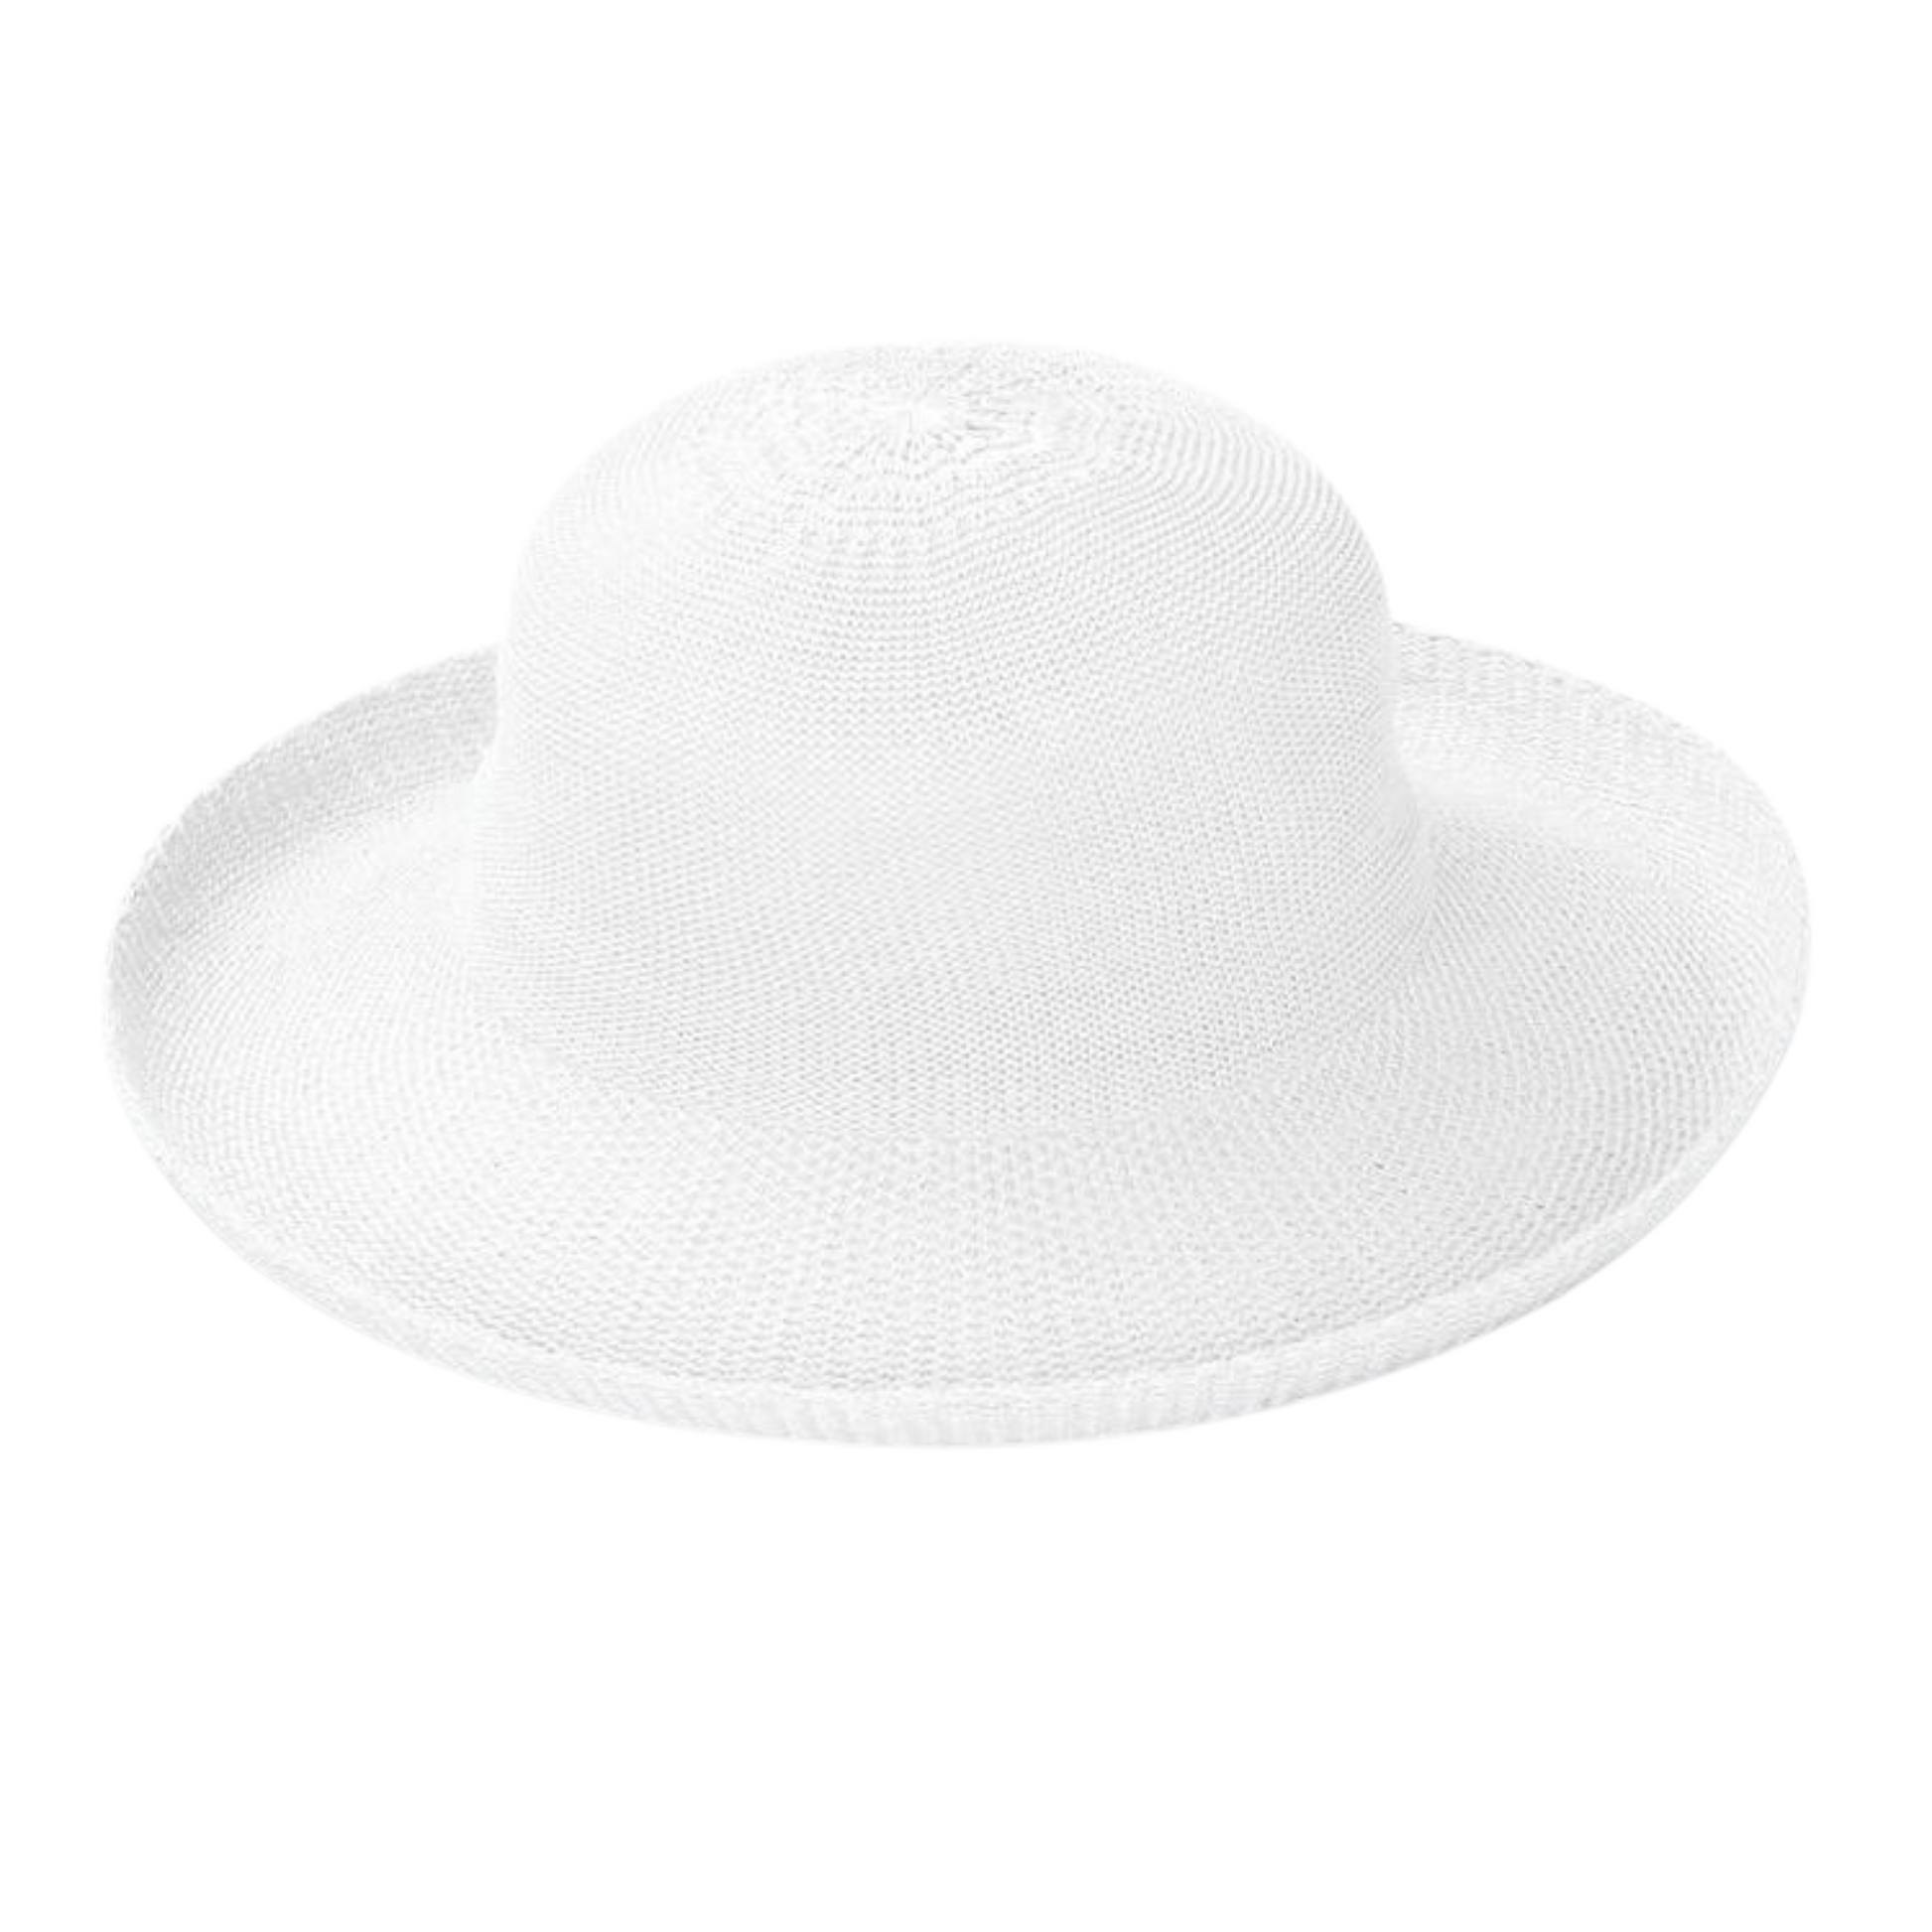 White weaved hat with soft curvature and rolled in brim.